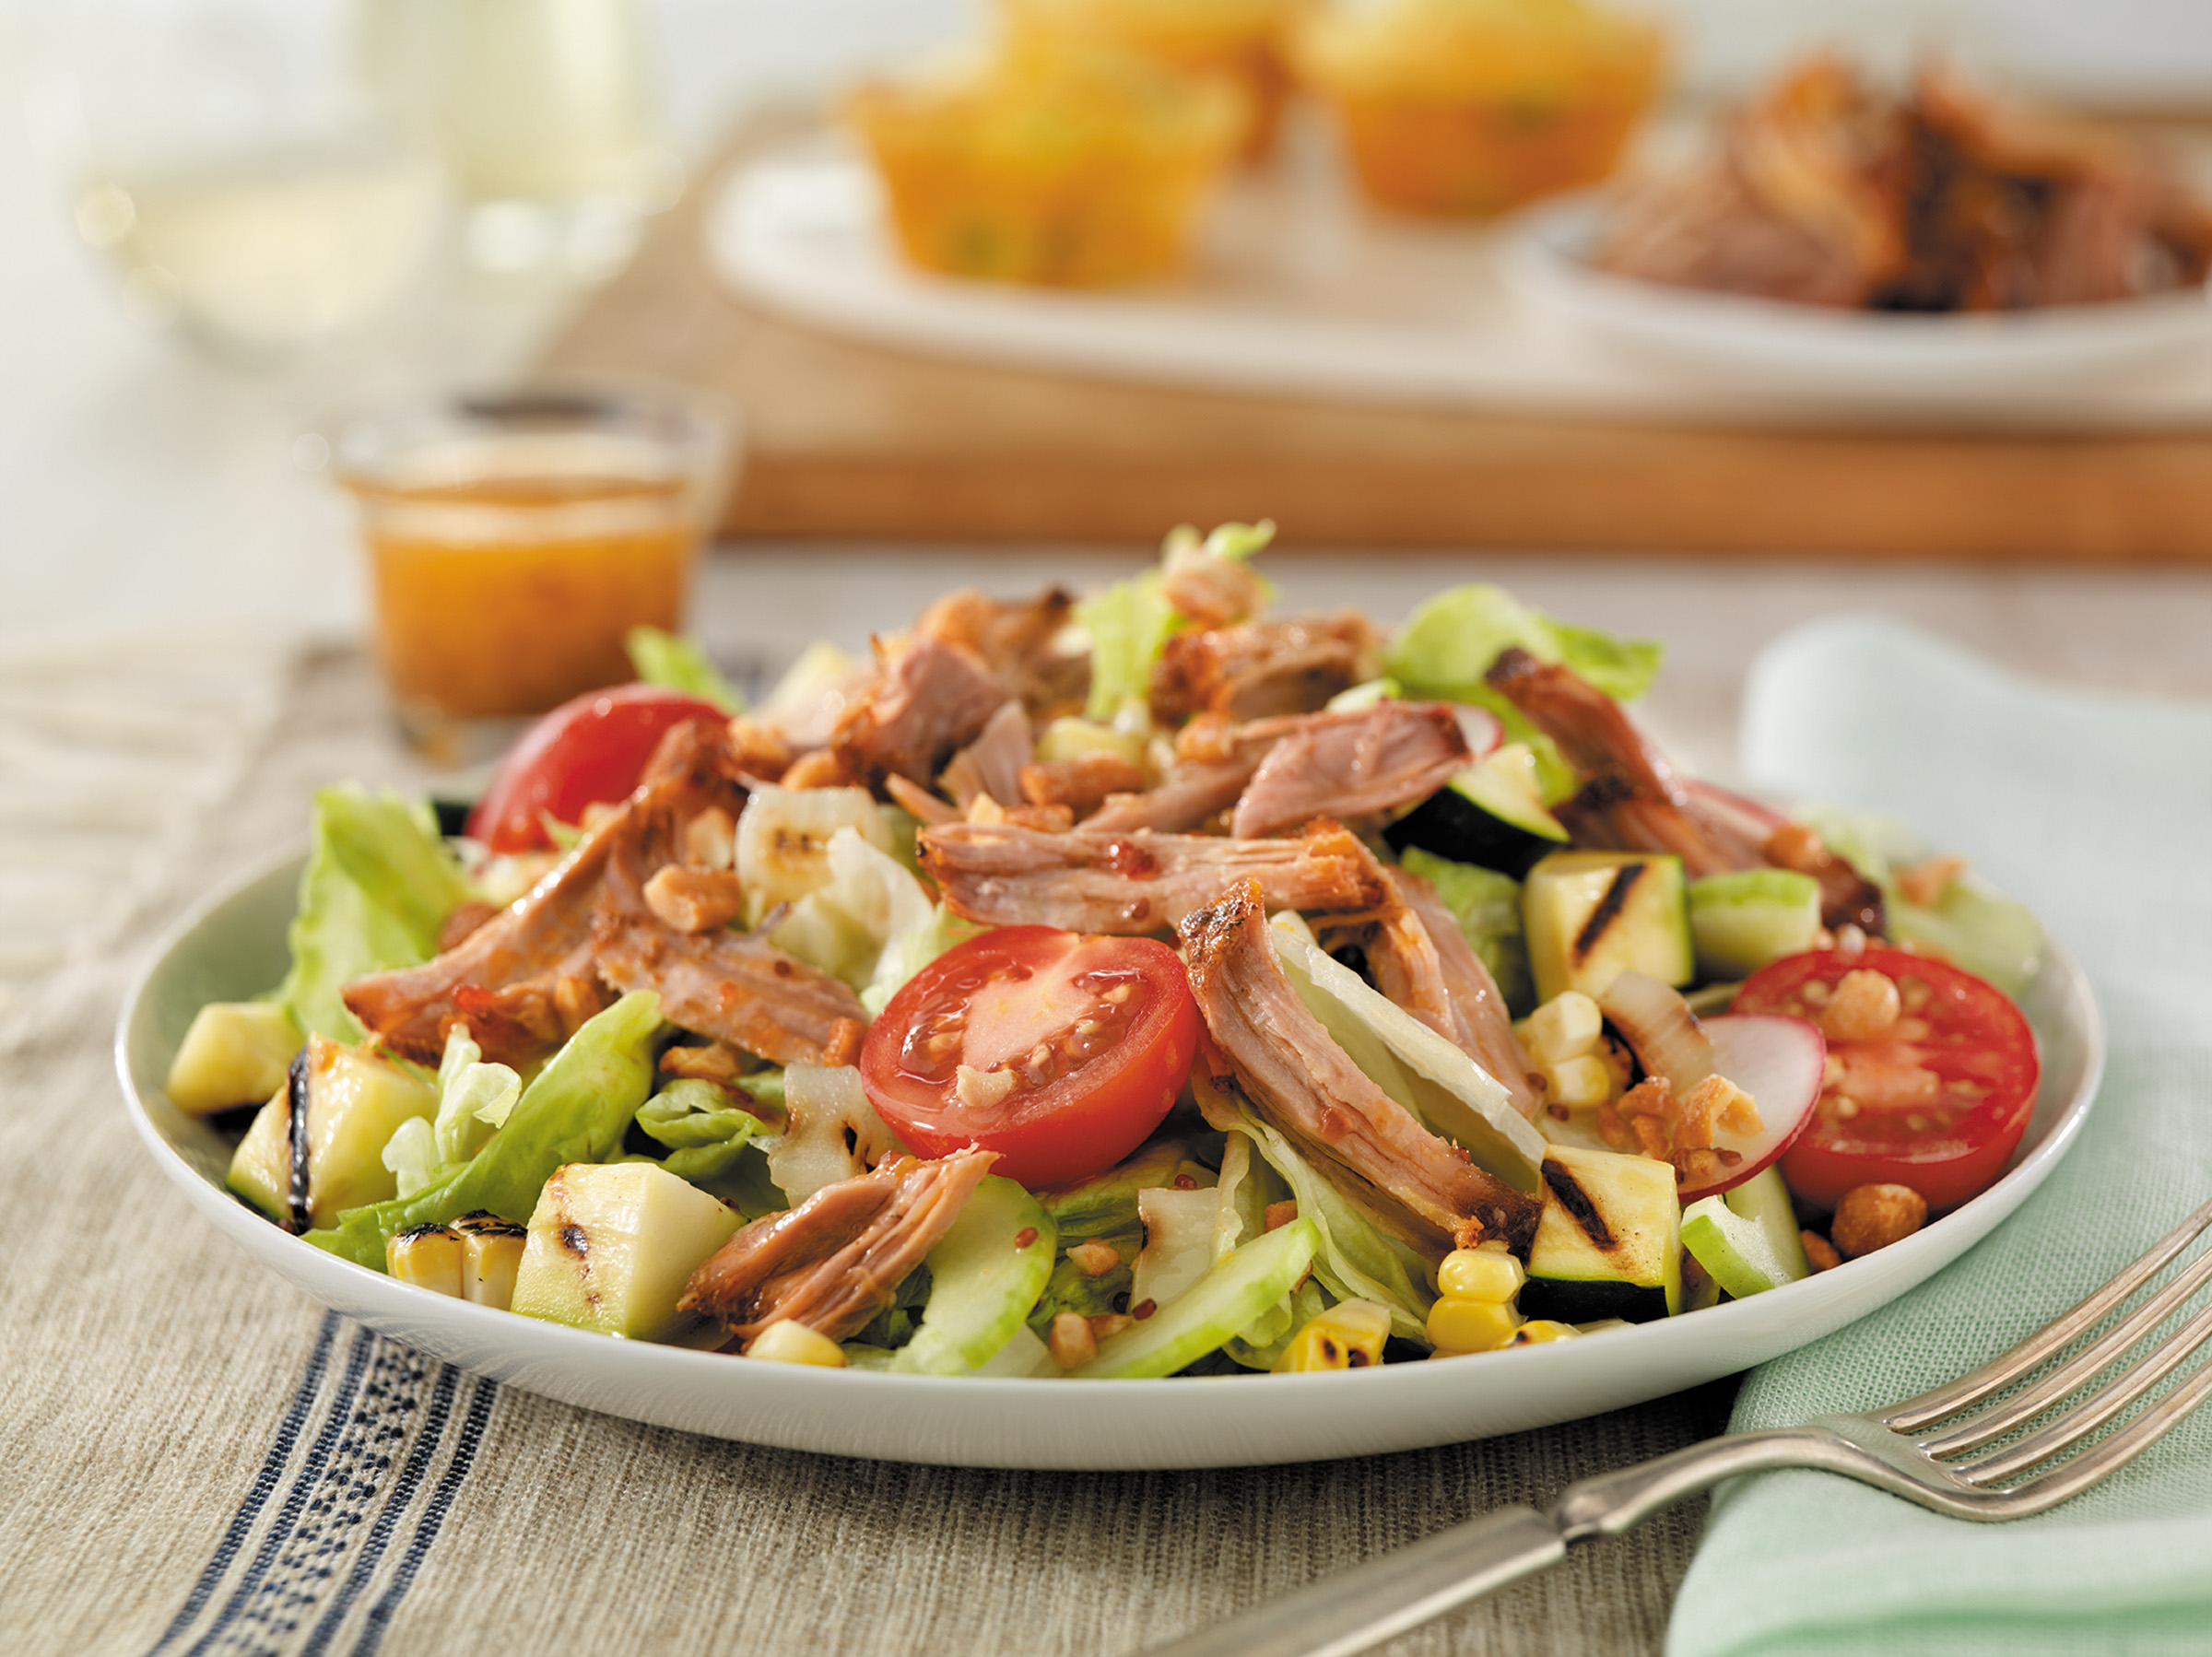 A colorful salad bowl filled with fresh greens, topped with tender pulled pork that has been cooked low and slow until it's melt-in-your-mouth juicy and flavorful. The salad is also garnished with sliced cherry tomatoes, fresh cucumbers, grilled zucchini and corn.